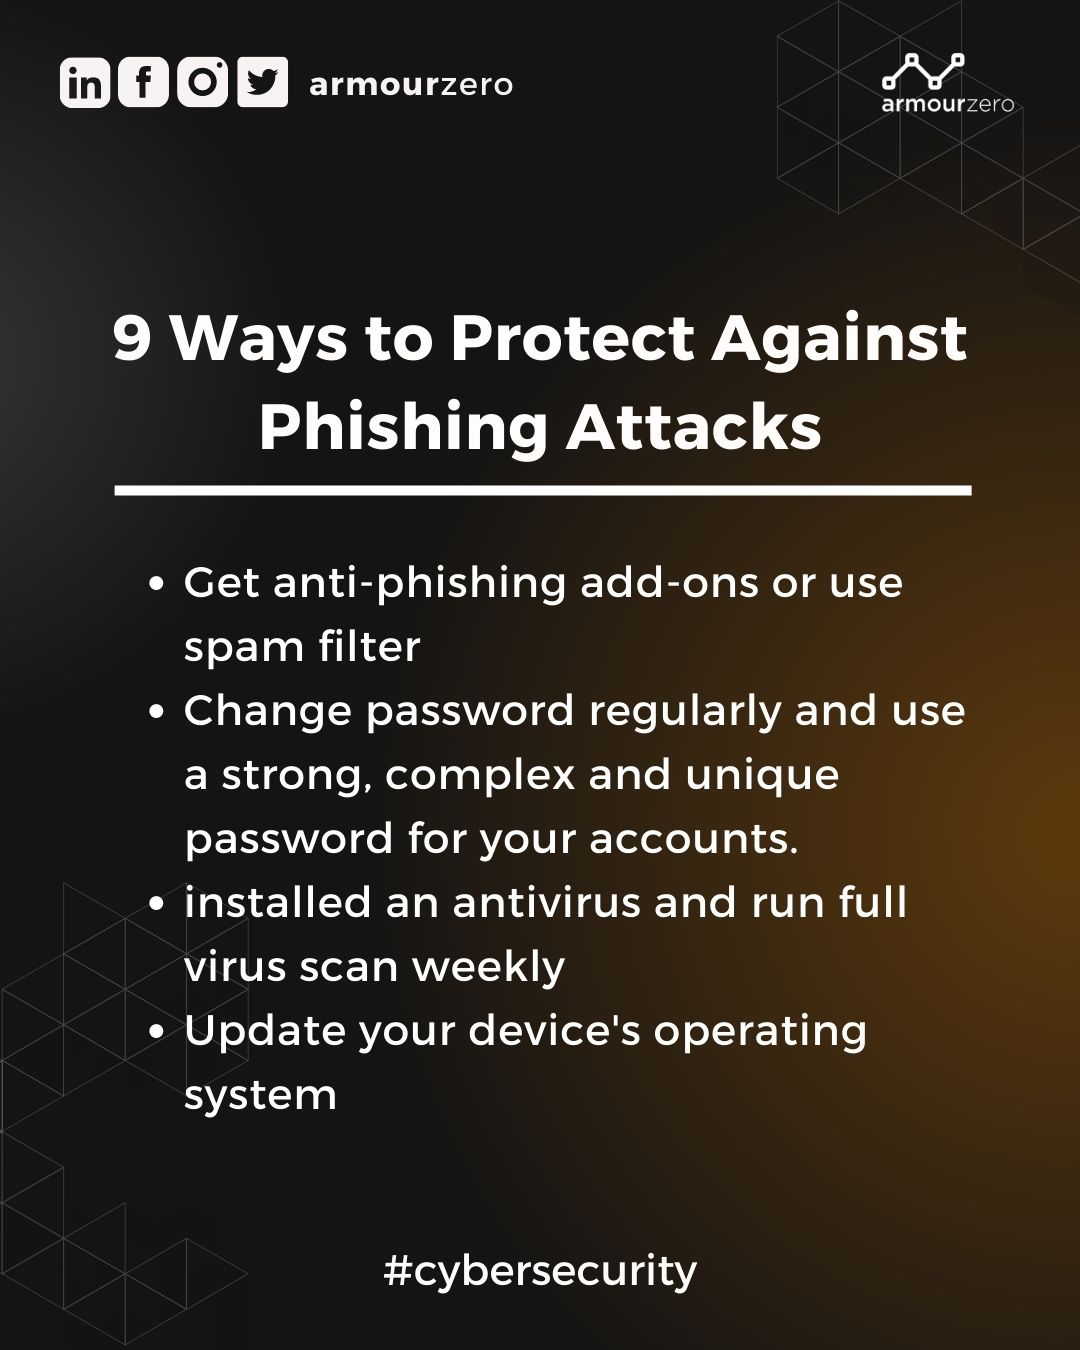 9 ways to Protect your business against phishing by armourzero